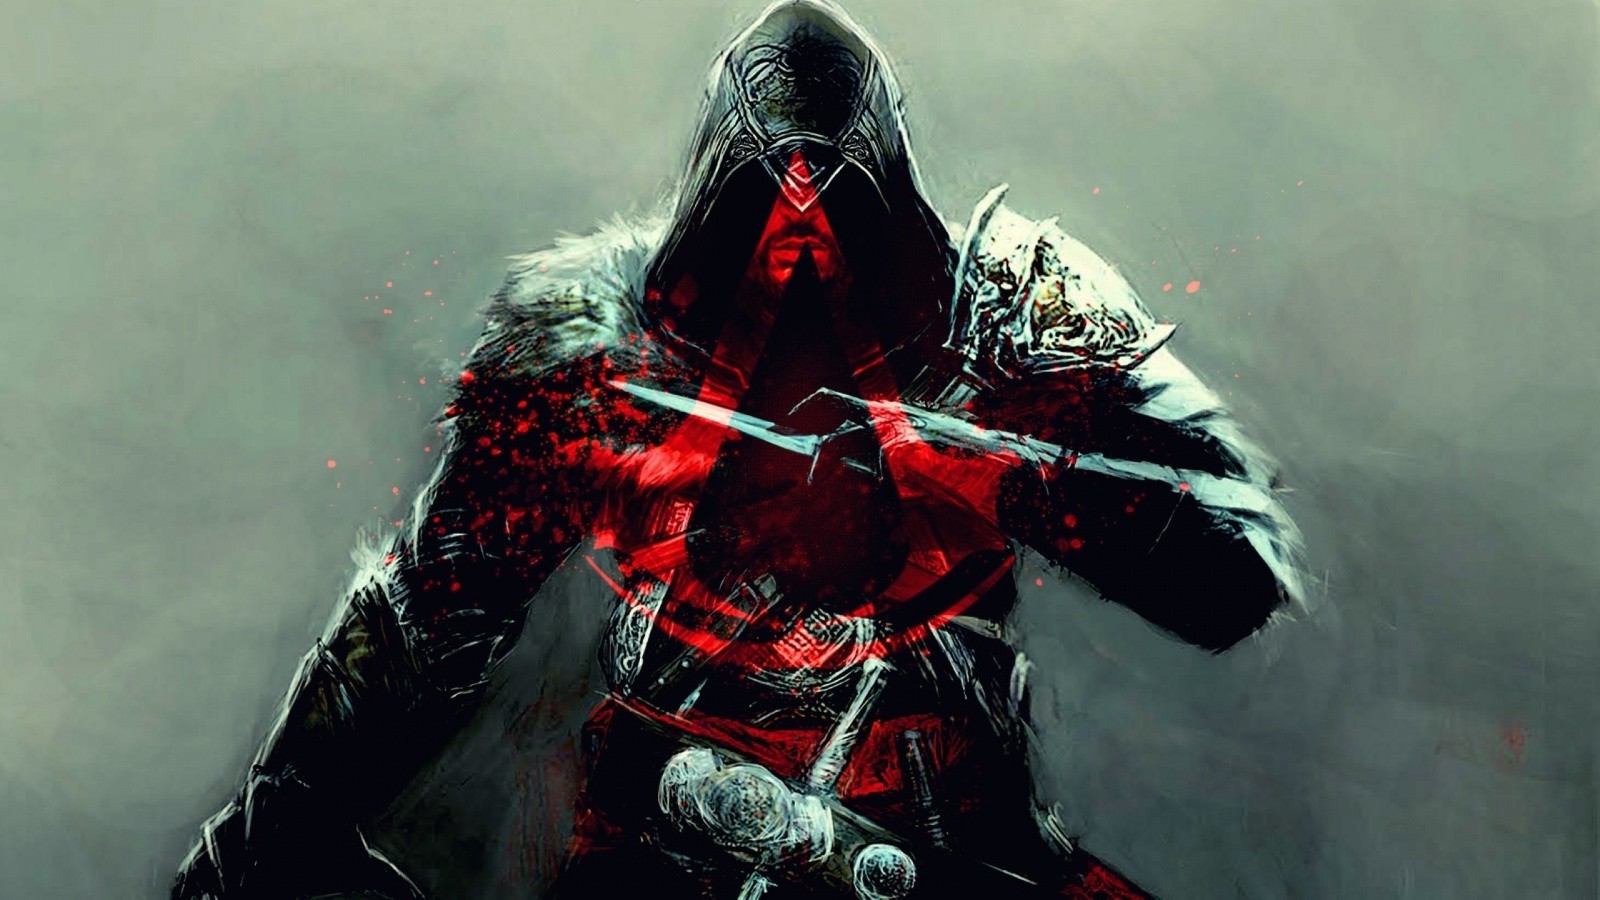 assassin creed brotherhood or revelations first